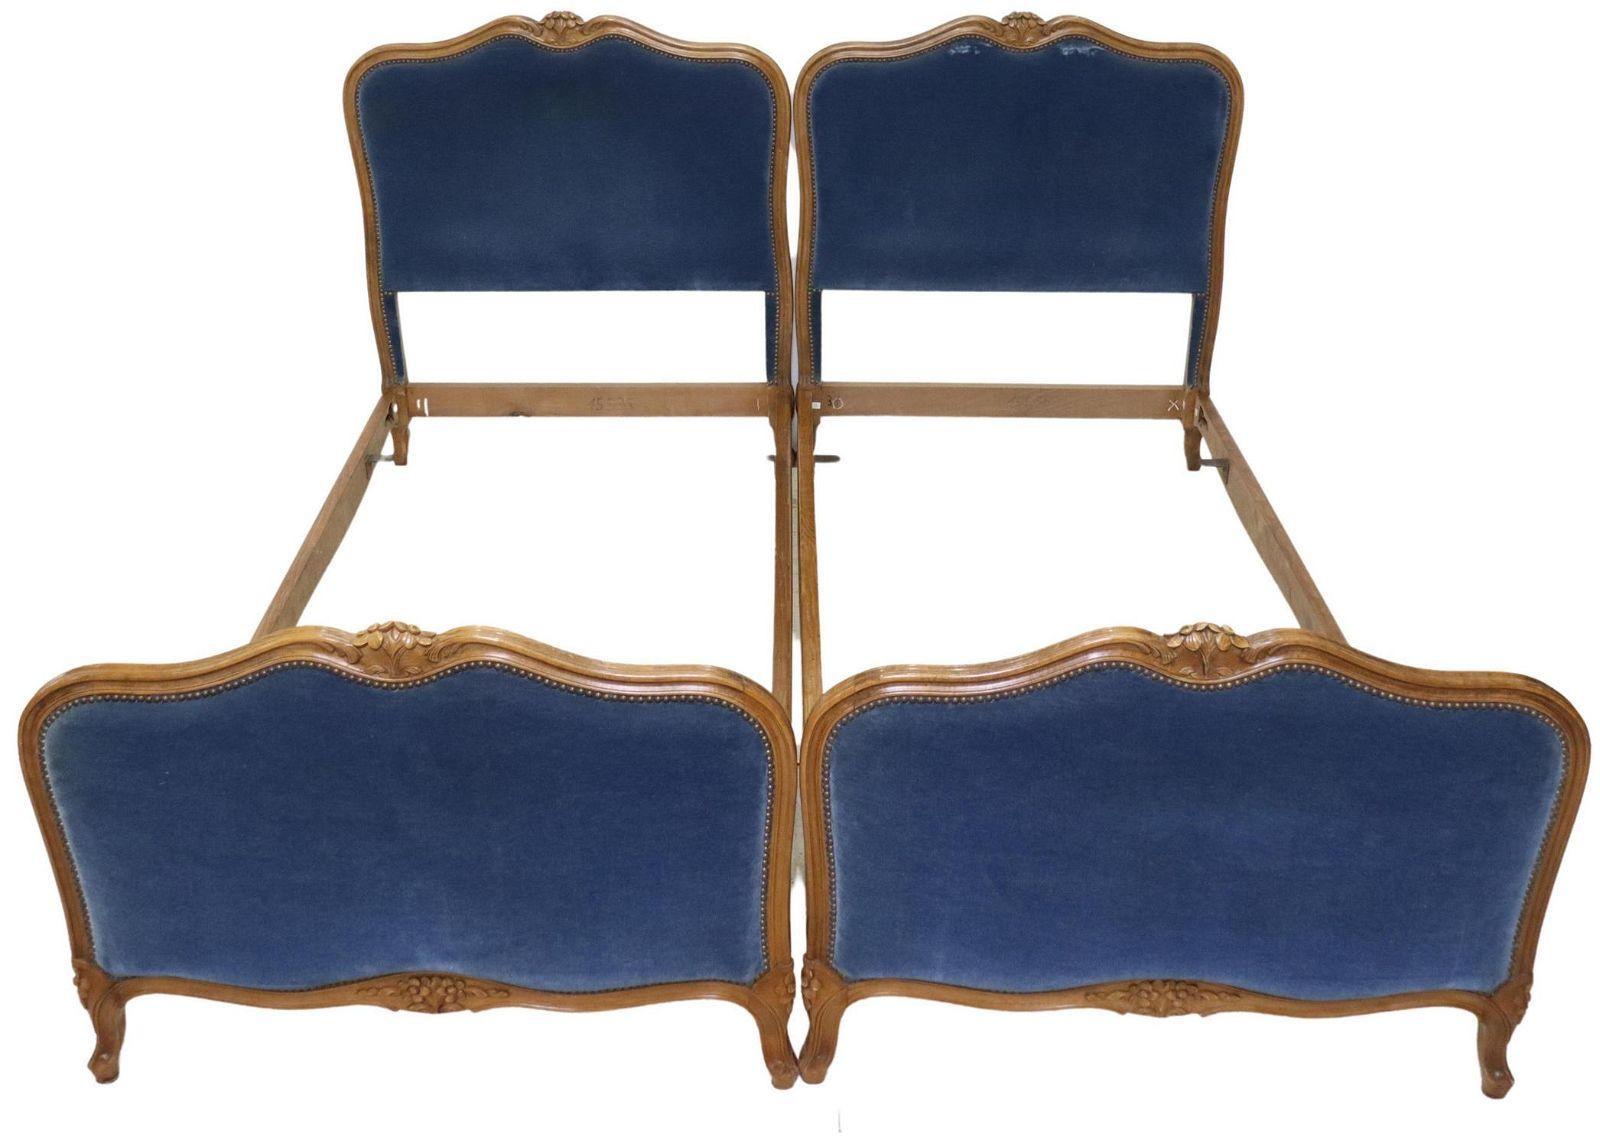 Antique French Louis XV Style Blue Velvet Upholstered Twin Beds, a Pair In Good Condition For Sale In Sheridan, CO